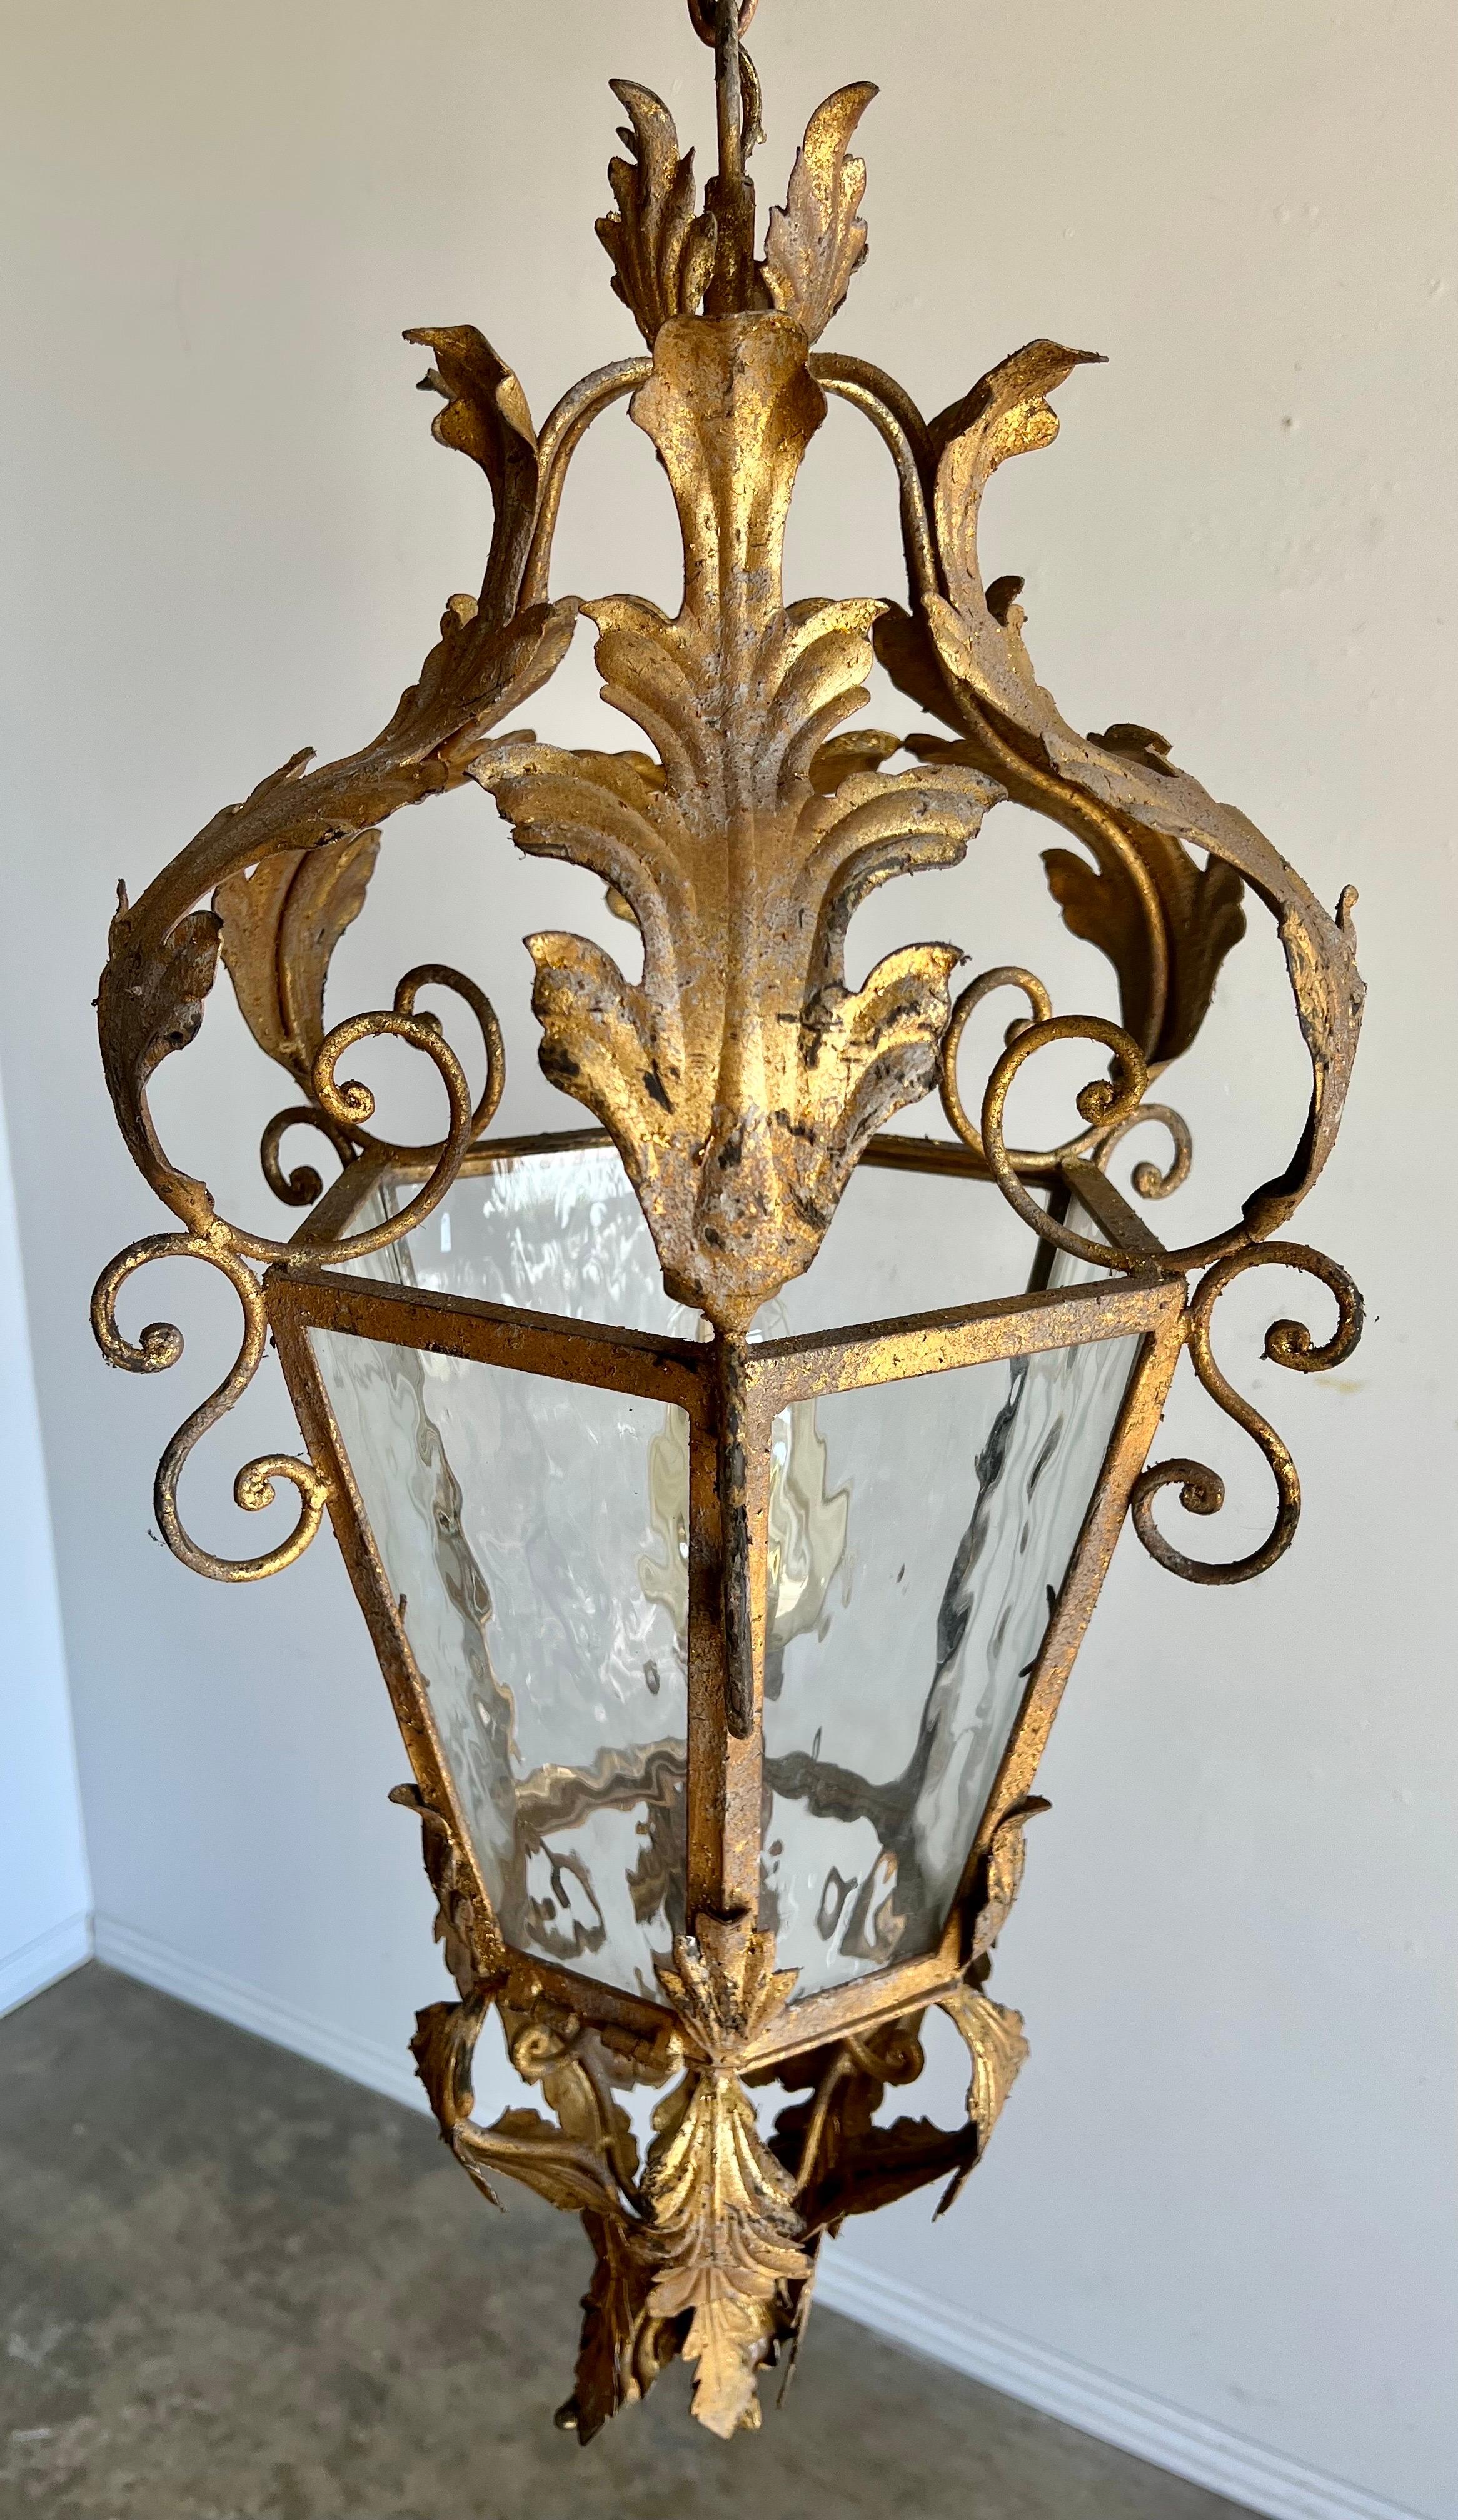 Italian gilt metal Lantern with original seeded glass. The lantern is newly rewired and includes chain and canopy.